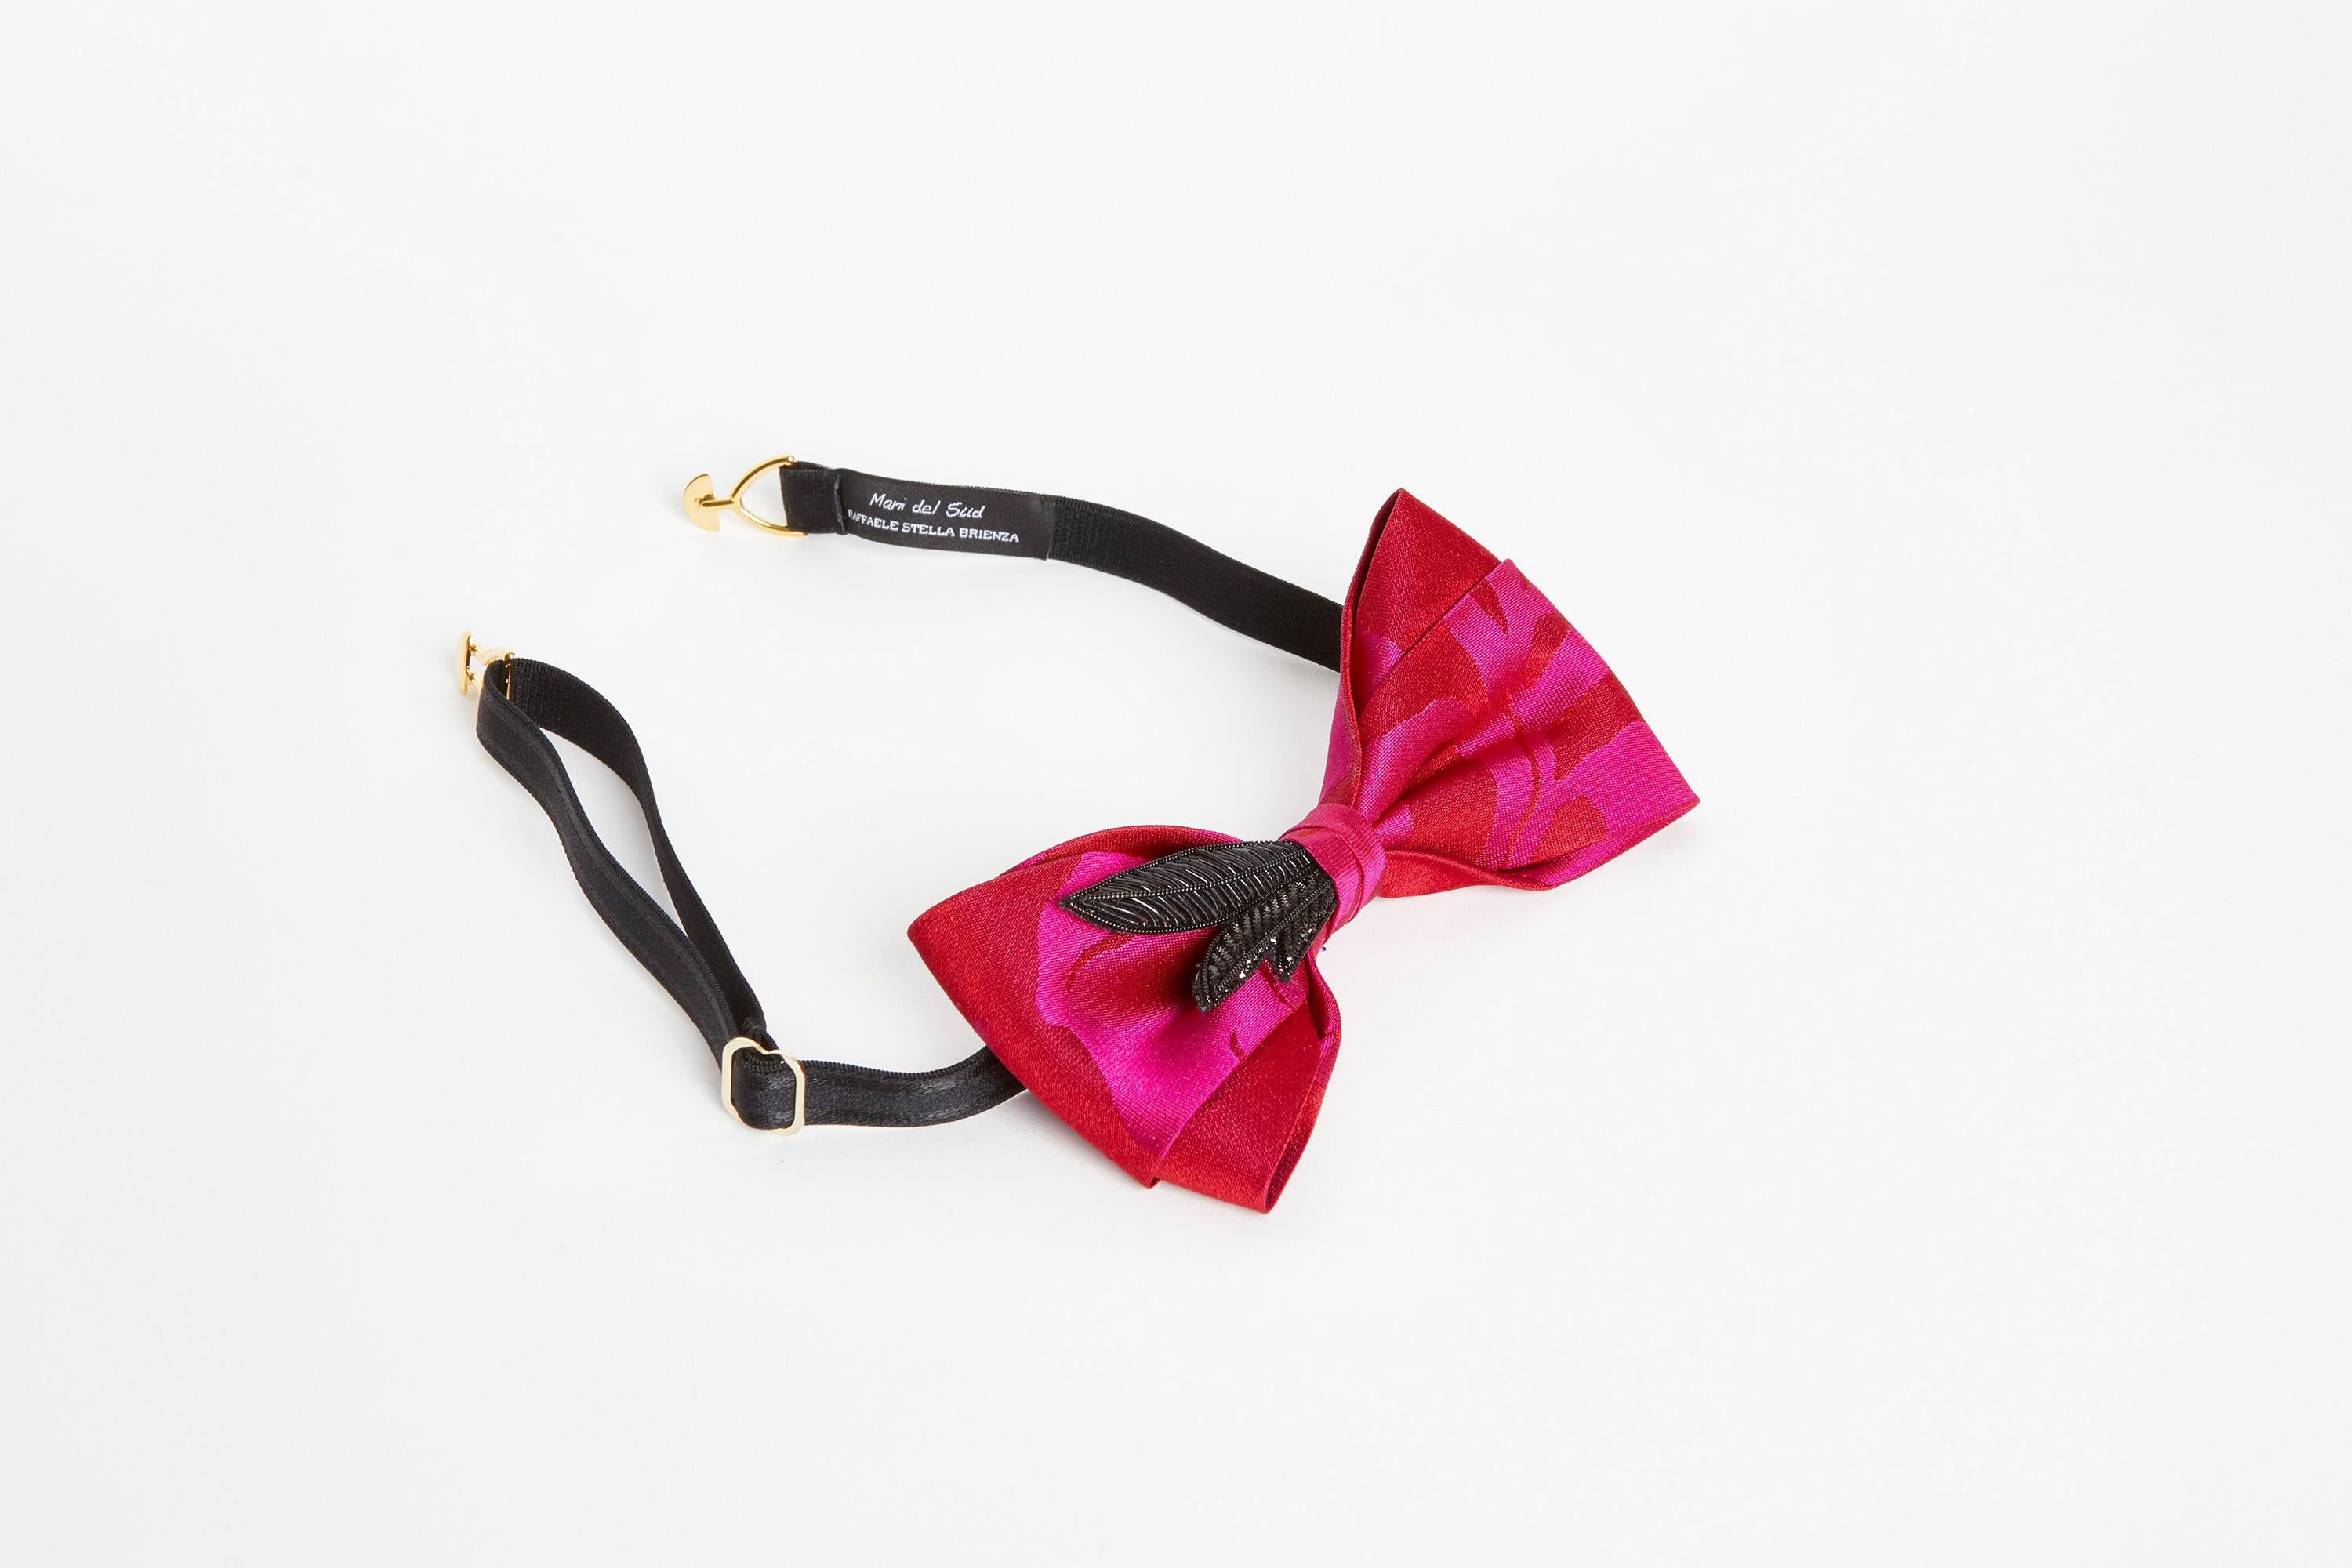 Black Zirconia crystal red plain silk papillon NWOT
Totally handmade in italy
FABRIC COLOR: Red
DECORATION COLOR: Crystal blacks
SIZE: One size fits all
MAIN FABRIC: 100% silk
DECORATION: Metal decoration with natural zircons
STRAP: Adjustable